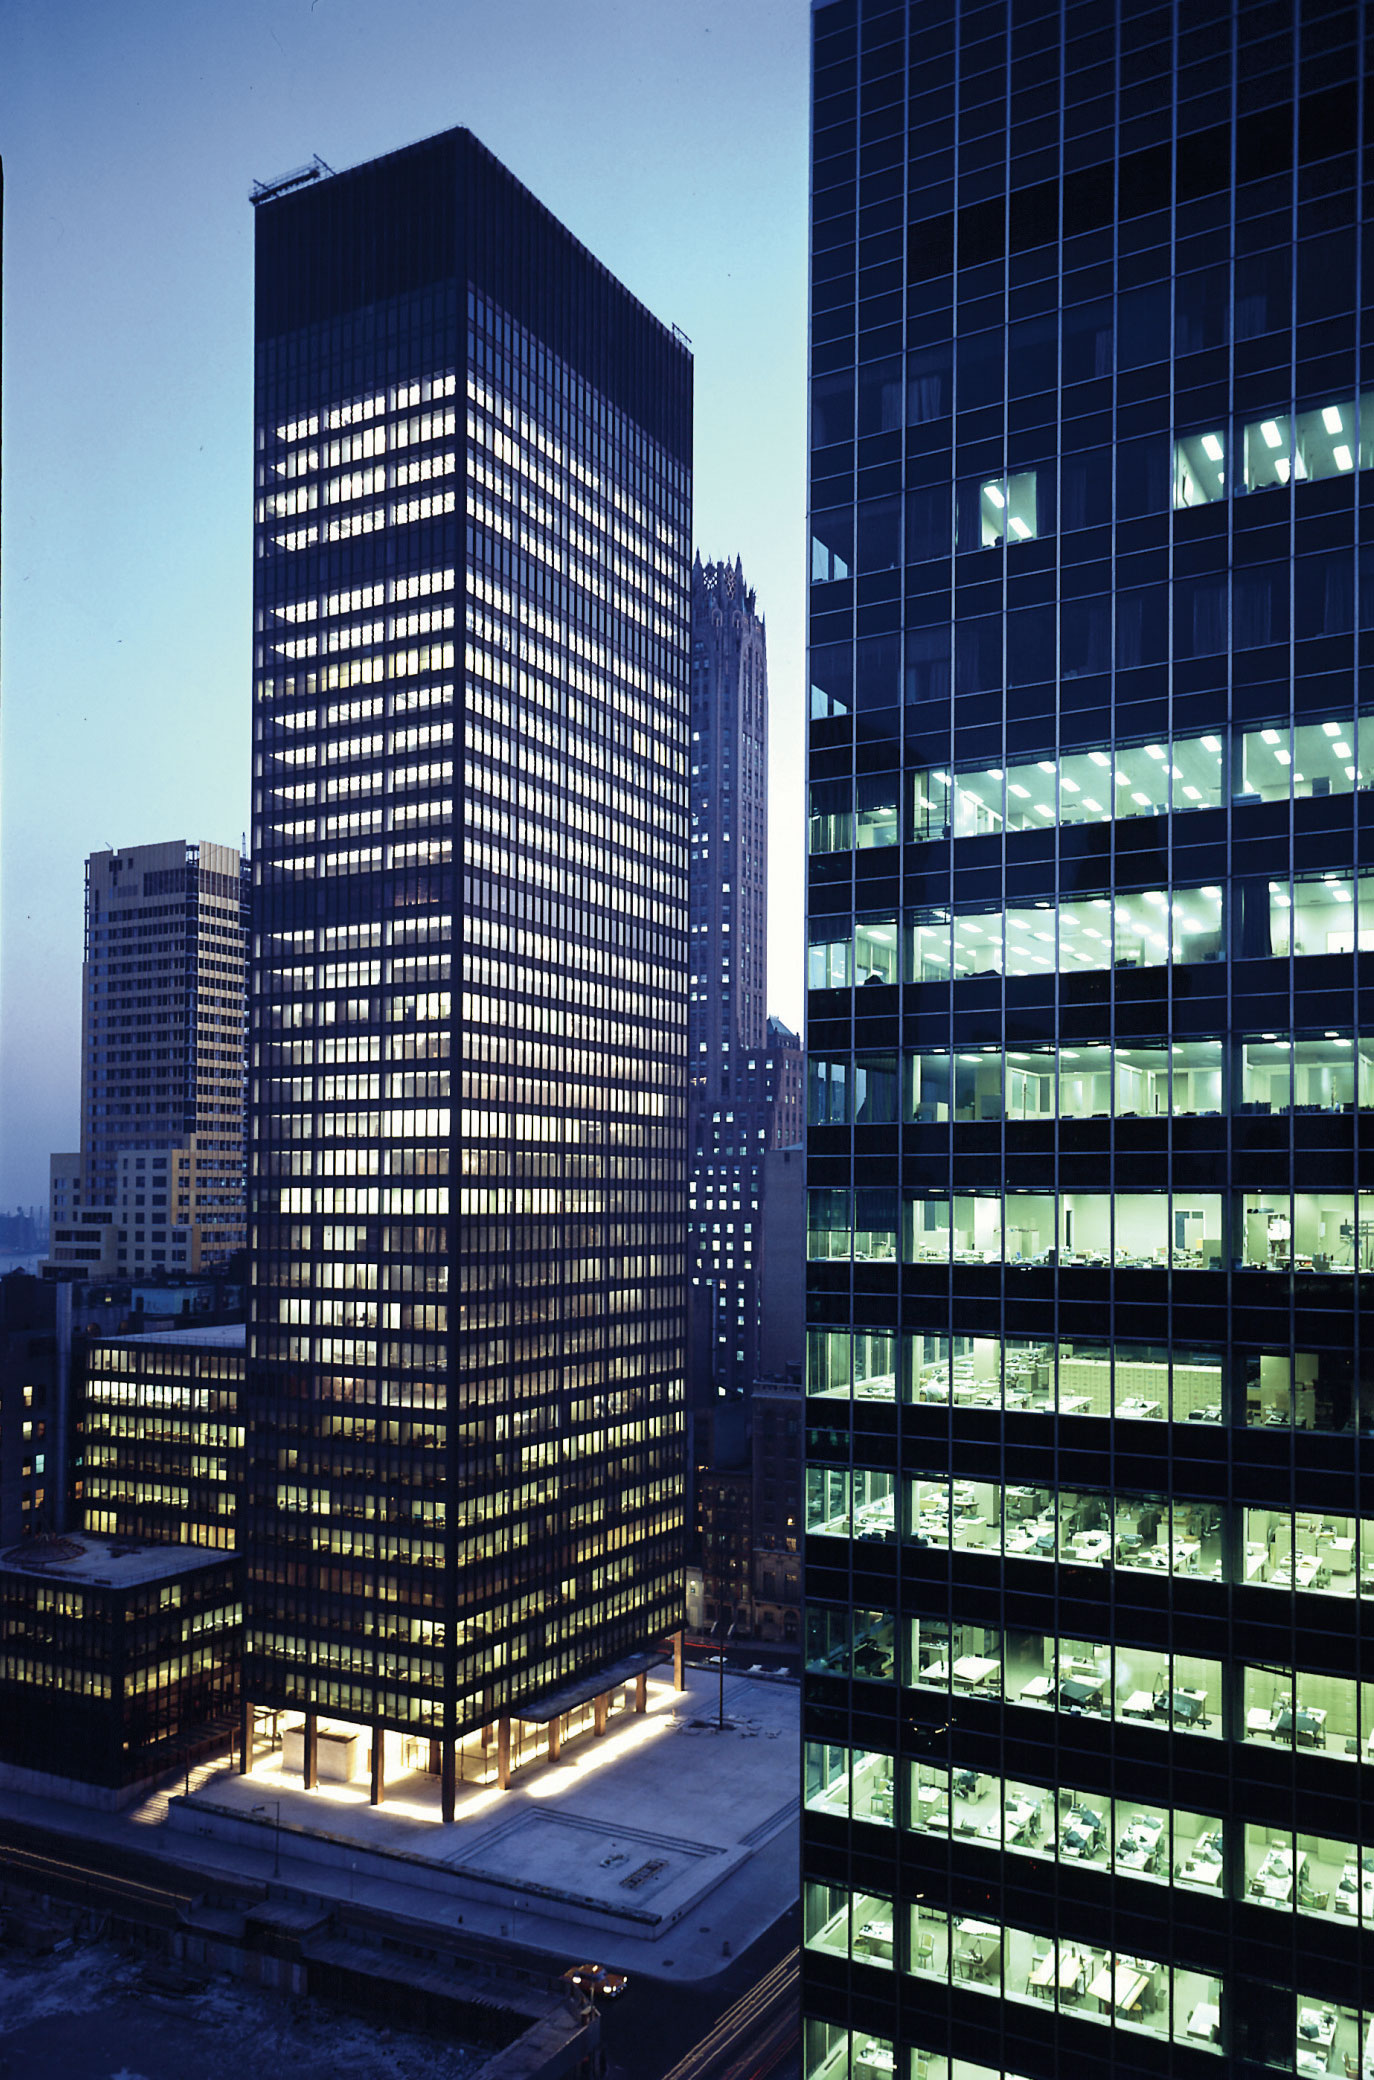 Mies van der Rohe with Philip Johnson, Seagram Building, 375 Park Avenue, New York, 1954–8; exterior view at dusk. Picture credit: © 2013 Artists Rights Society (ARS), New York / VG Bild-Kunst, Bonn
